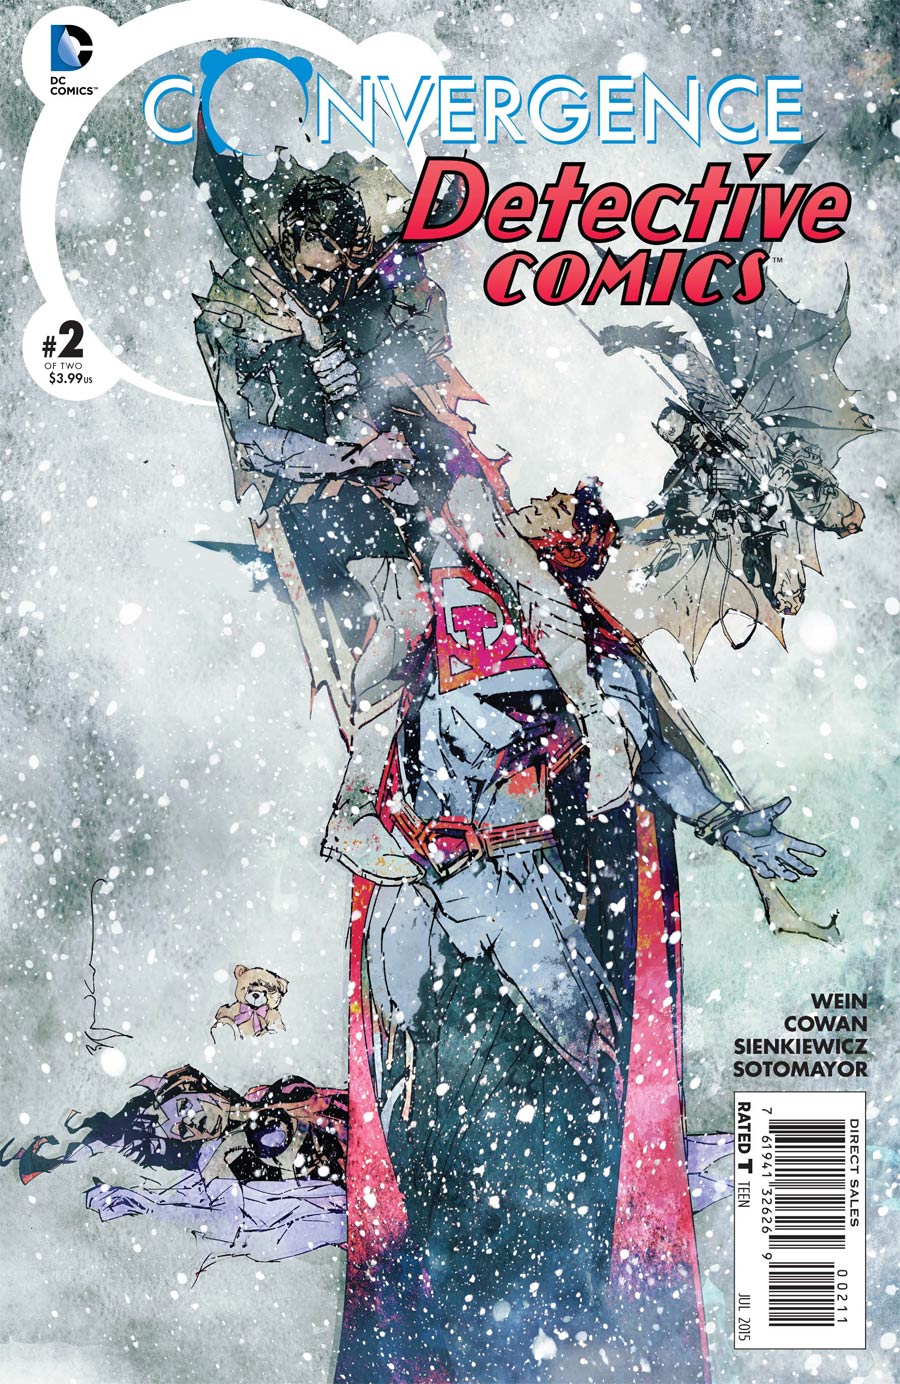 Convergence Detective Comics #2 Cover A Regular Bill Sienkiewicz Cover